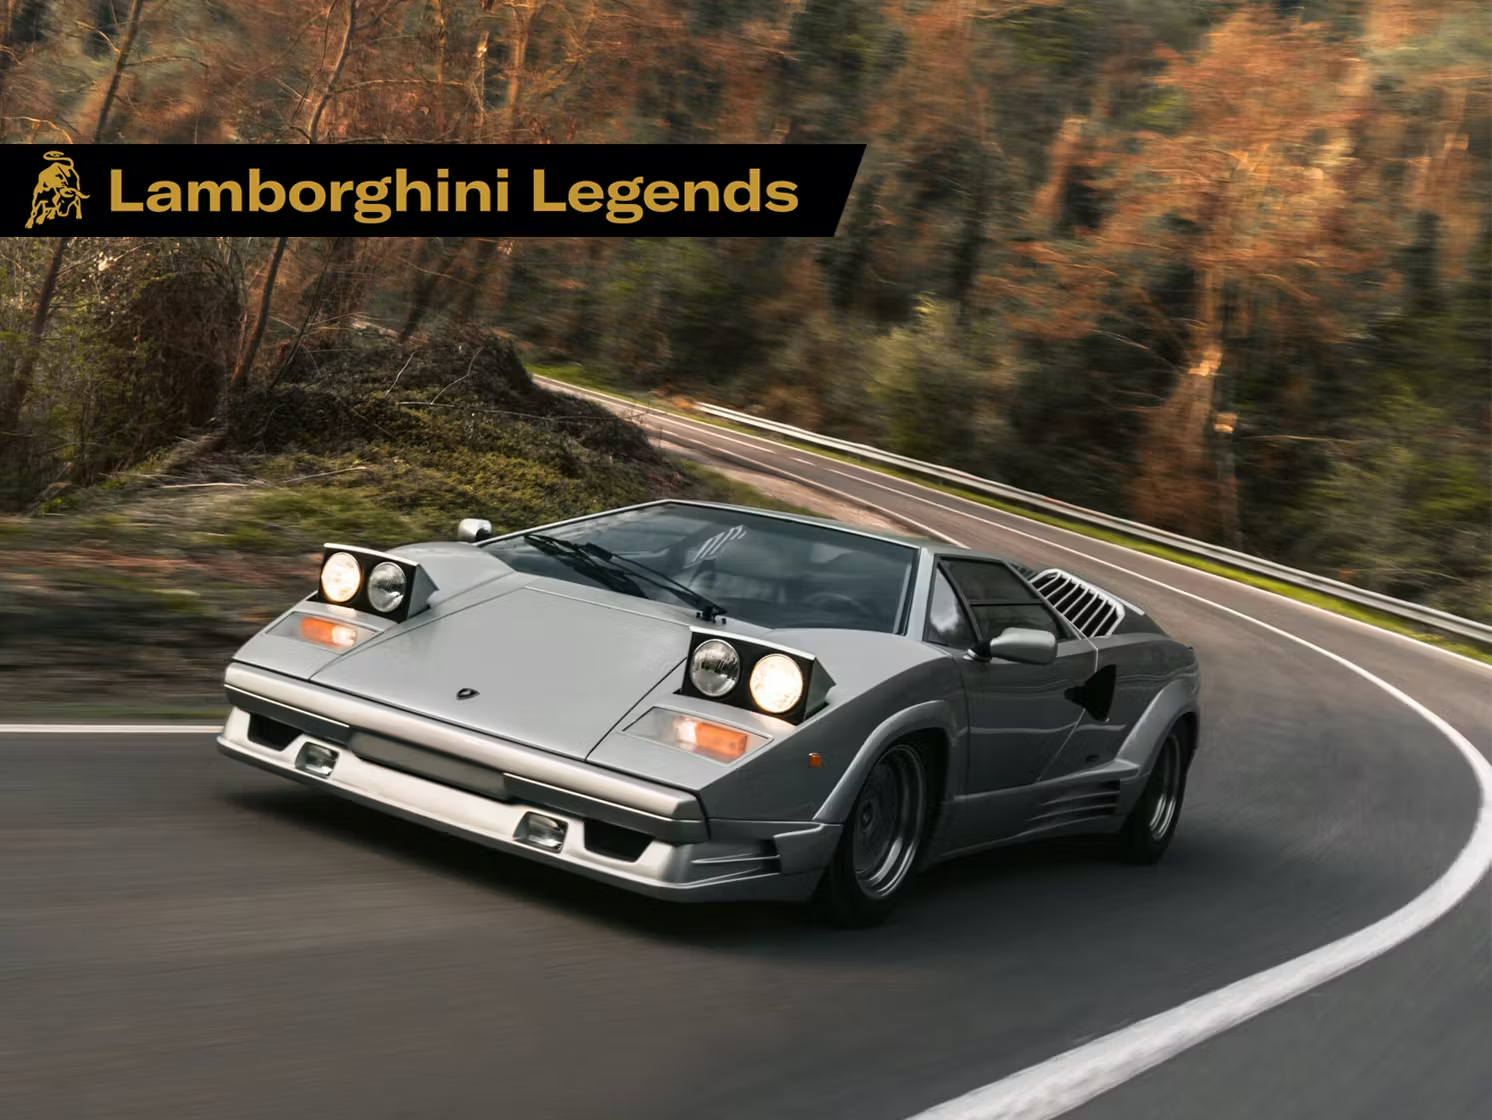 Driving my childhood dream car, the Countach, wasn’t what I expected